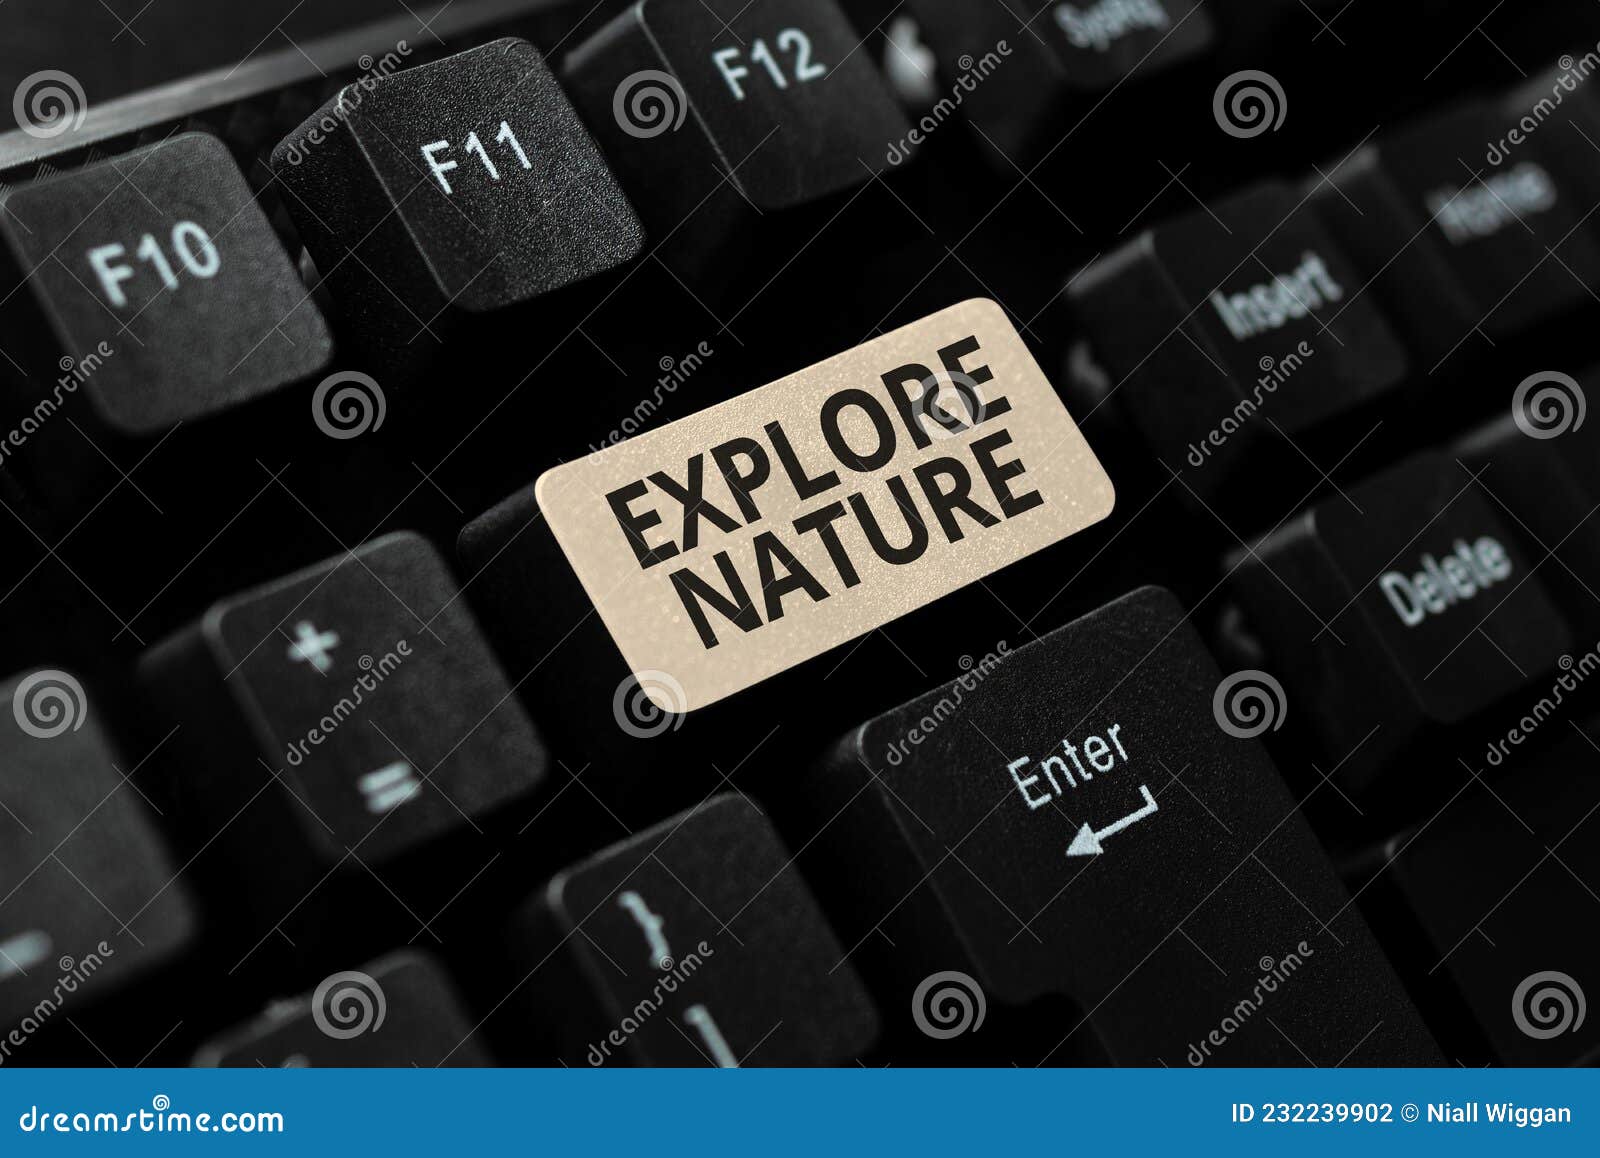 Text Sign Showing Explore Nature. Concept the Countryside Enjoying the Travel Converting Stock Photo - Image of explore, group: 232239902